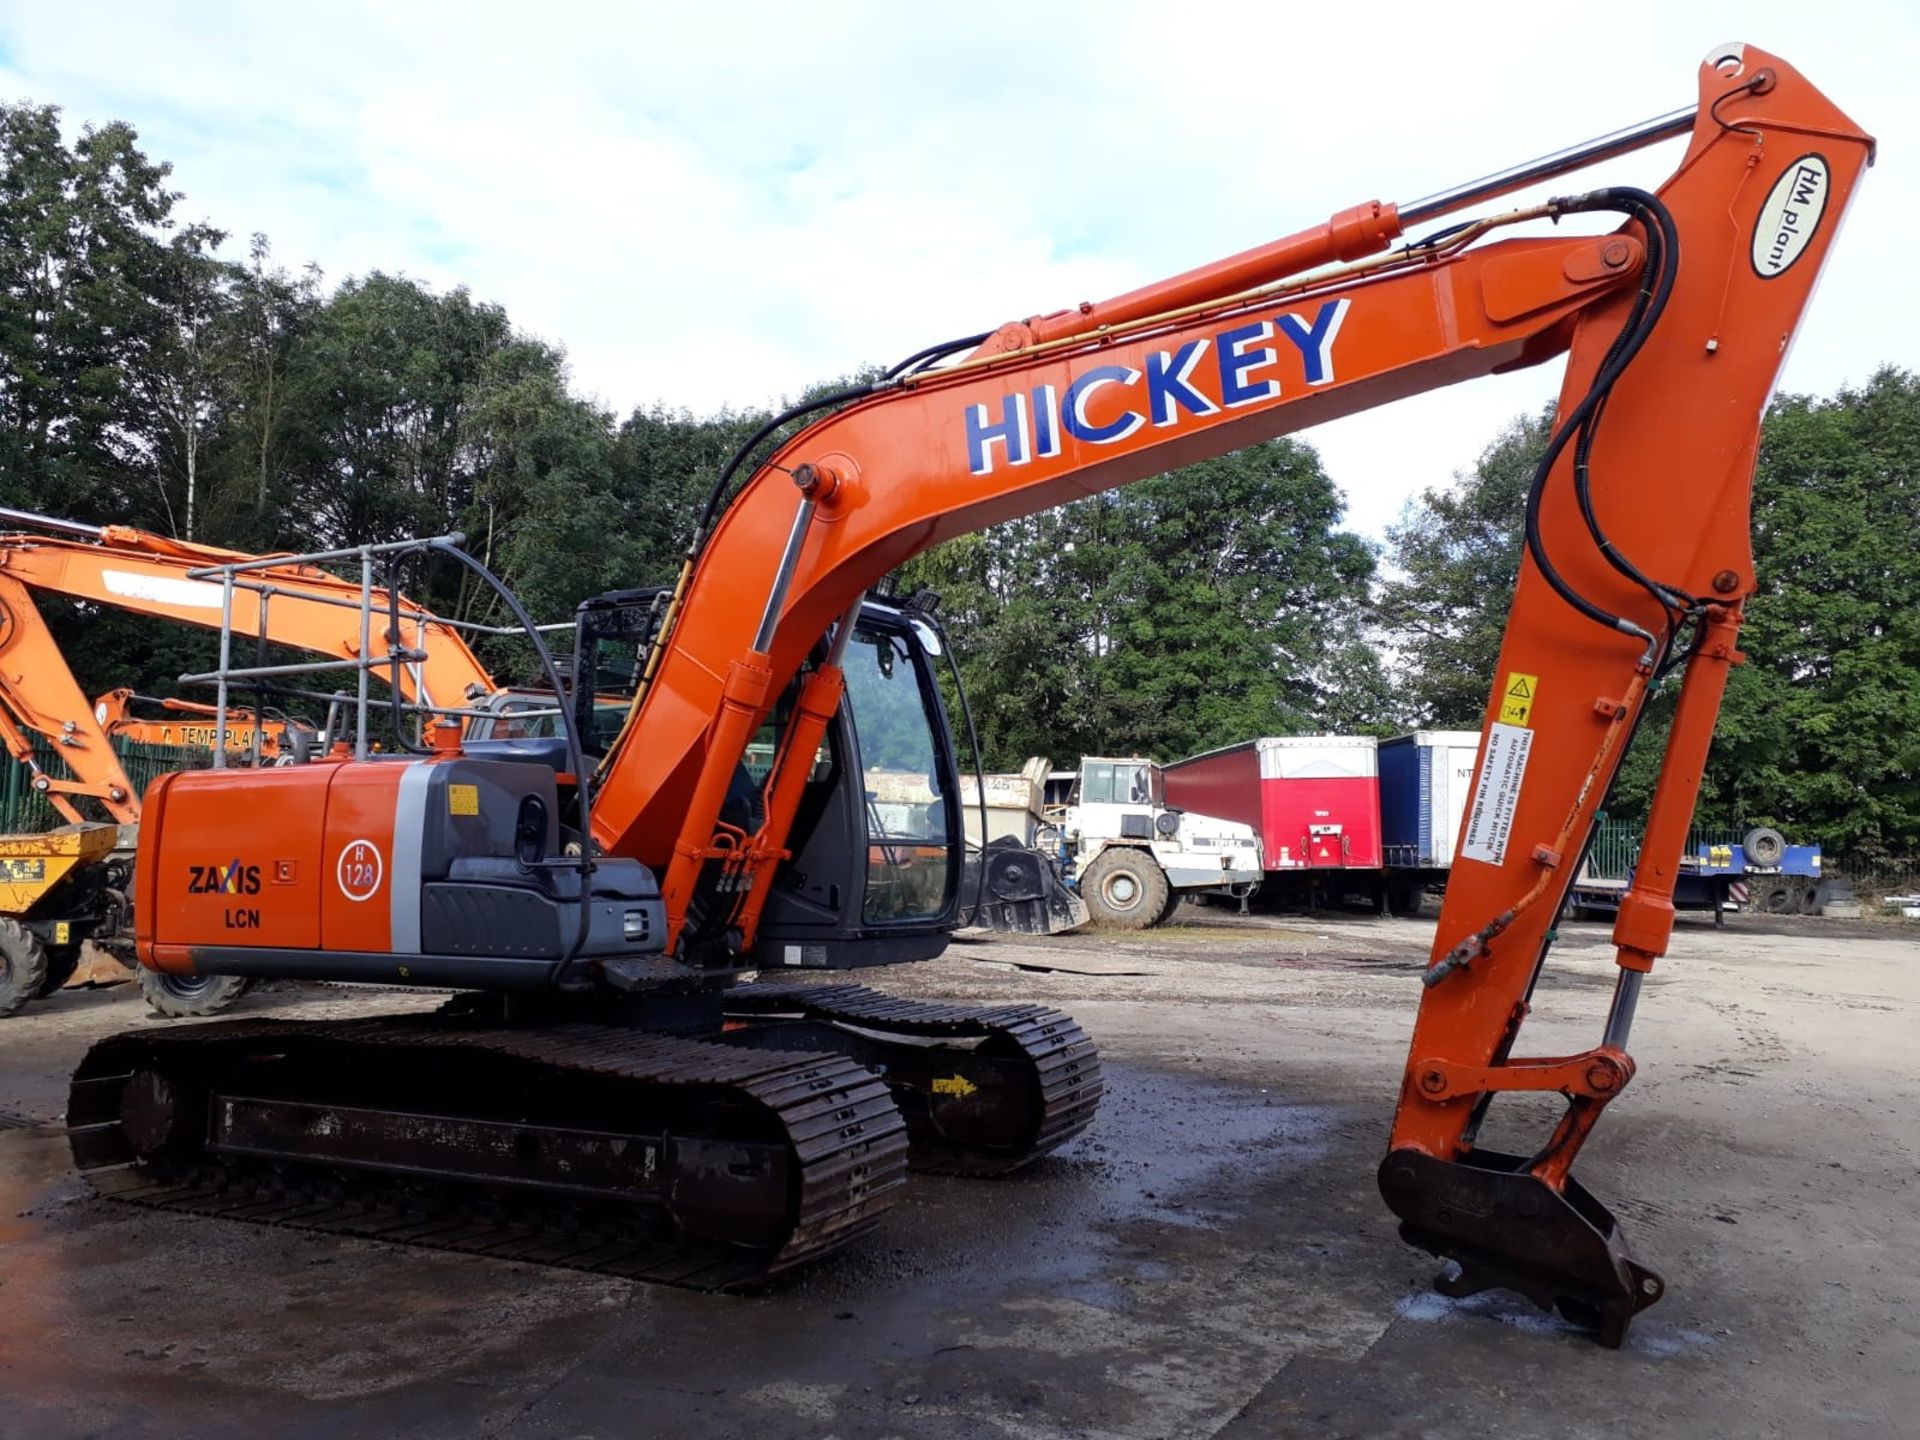 Hitachi ZX130LCN-3 Tracked Excavator, serial no. HCMBCH00L00300356, year of manufacture 2011,